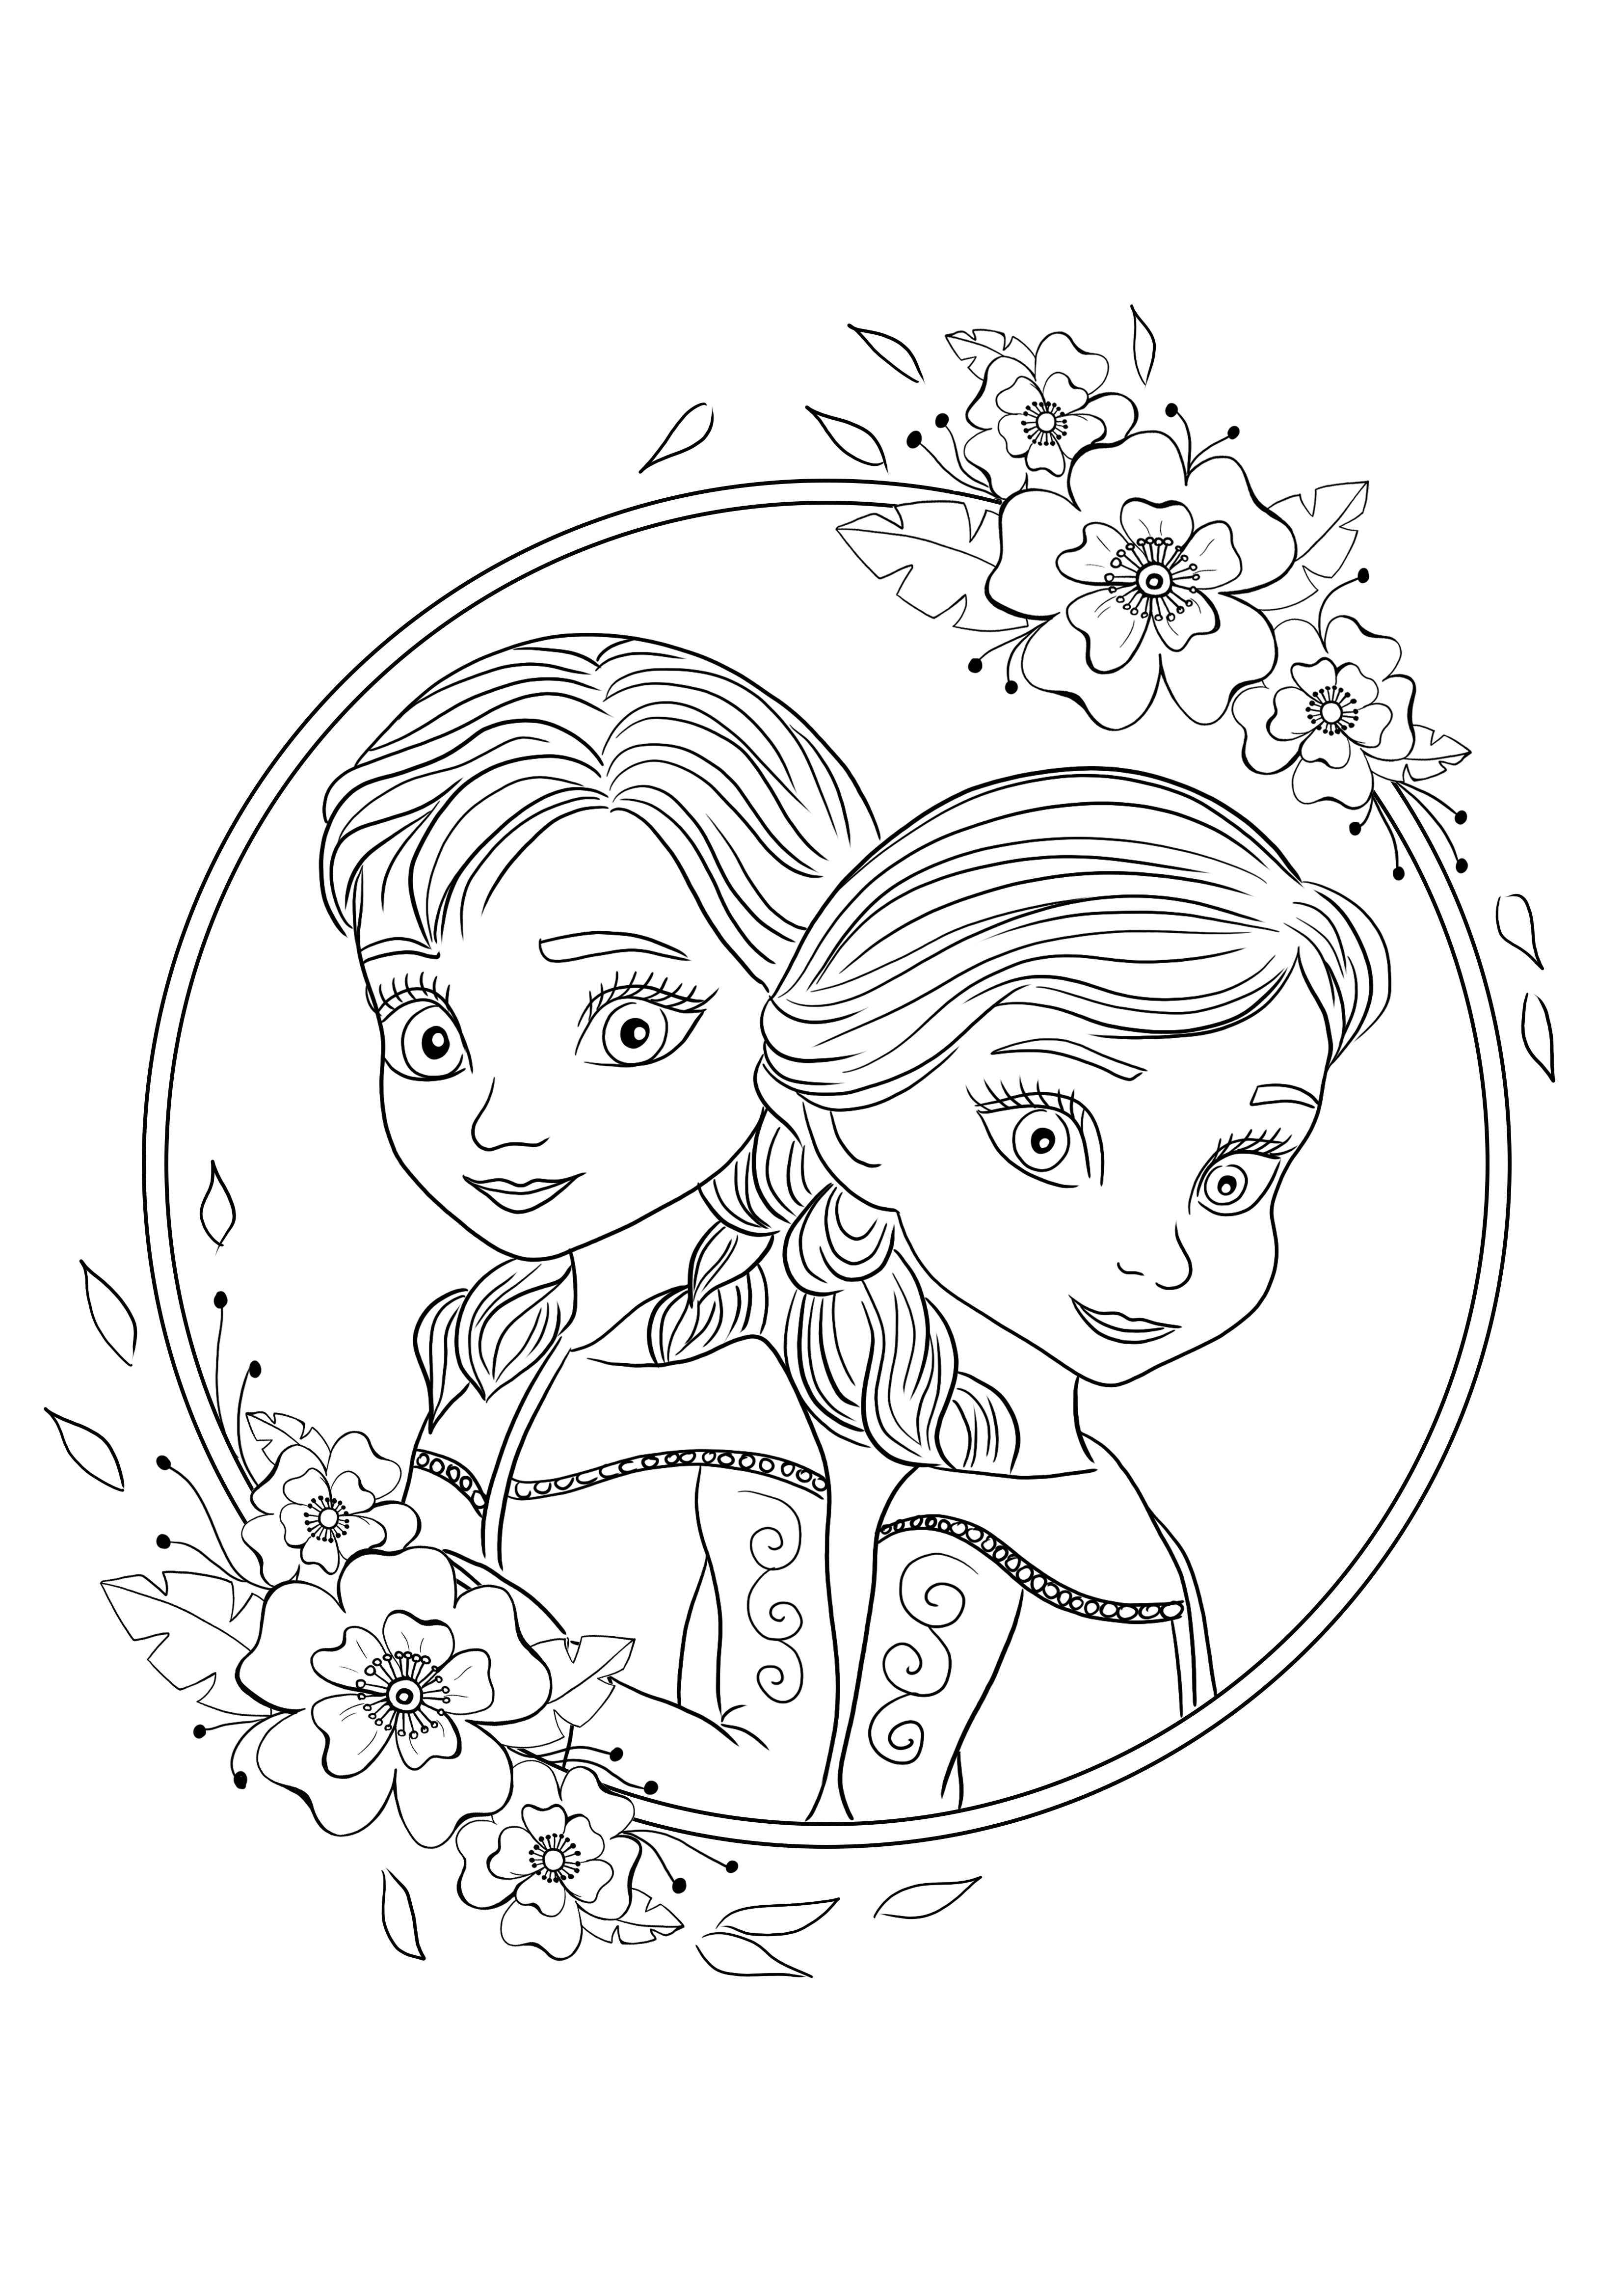 Free printable of young Elsa and Ana coloring image to download